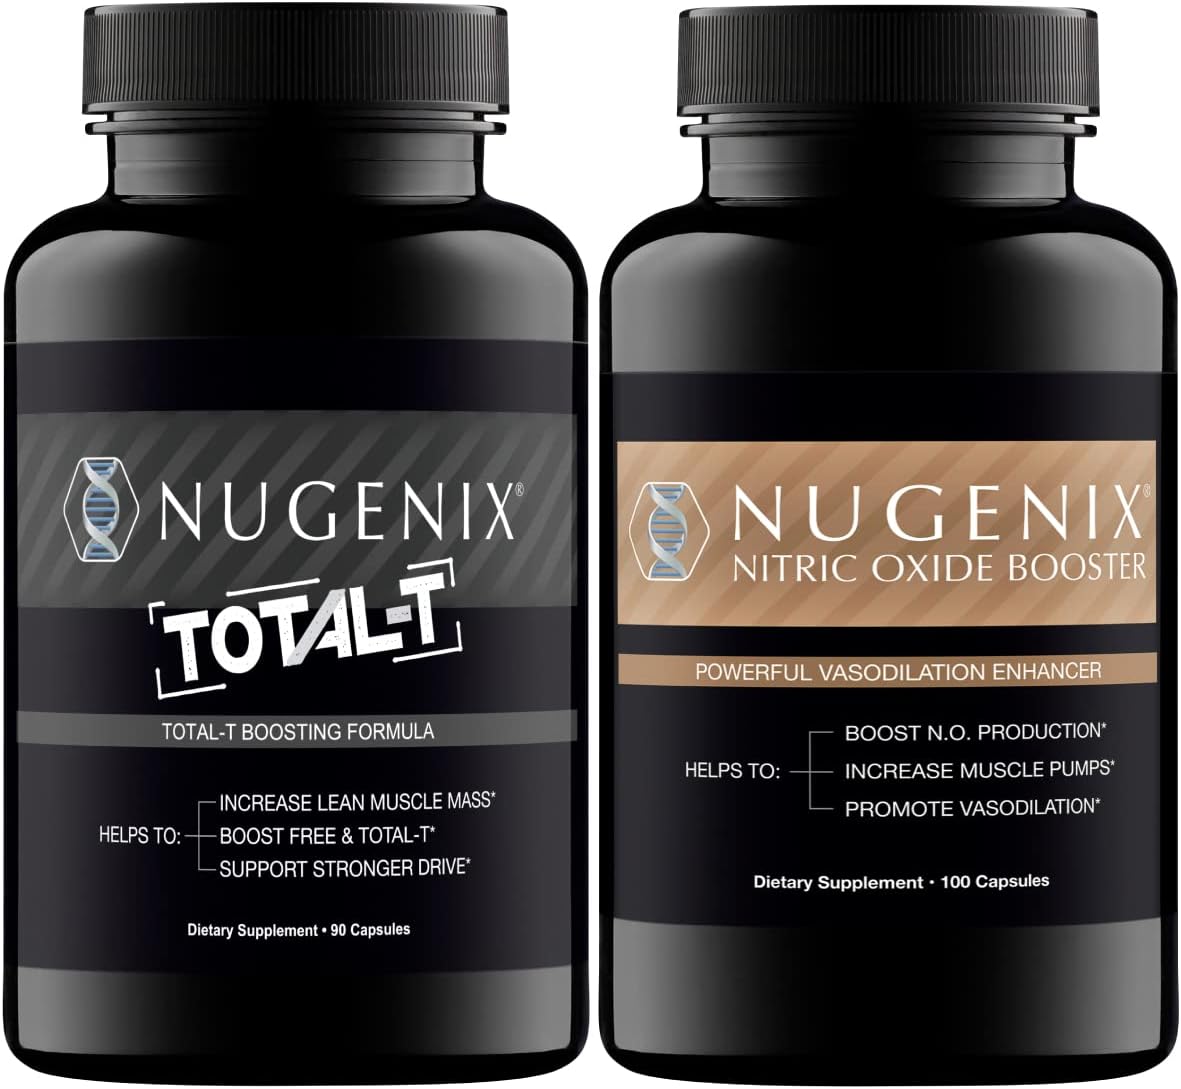 Nugenix Total-T Free and Total Testosterone Booster for Men & Nugenix Nitric Oxide Booster Supplements Bundle